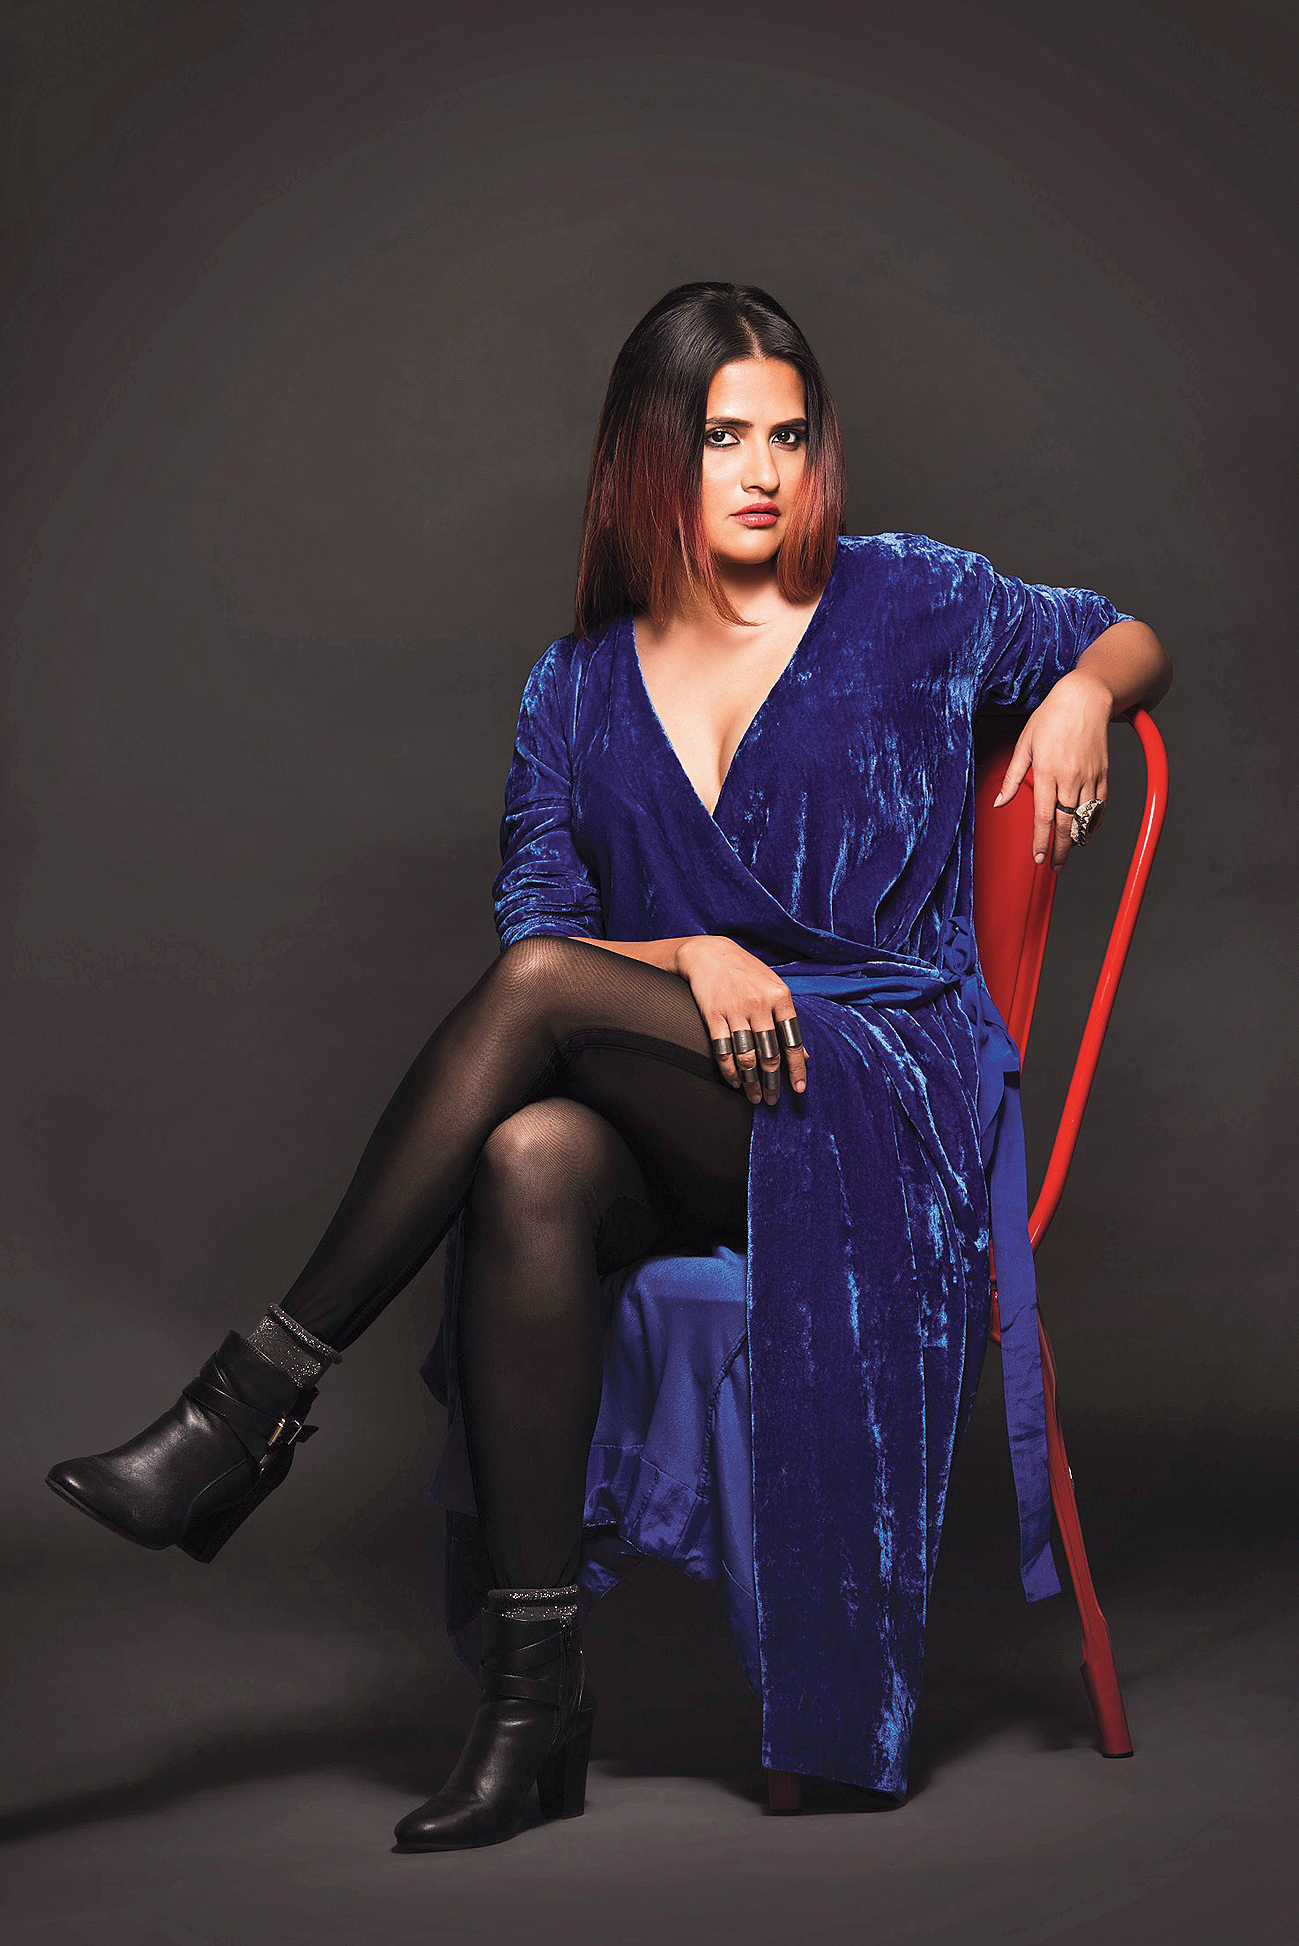 Singer Sona Mohapatra Writes About Her Music Mantra In Lockdown Telegraph India